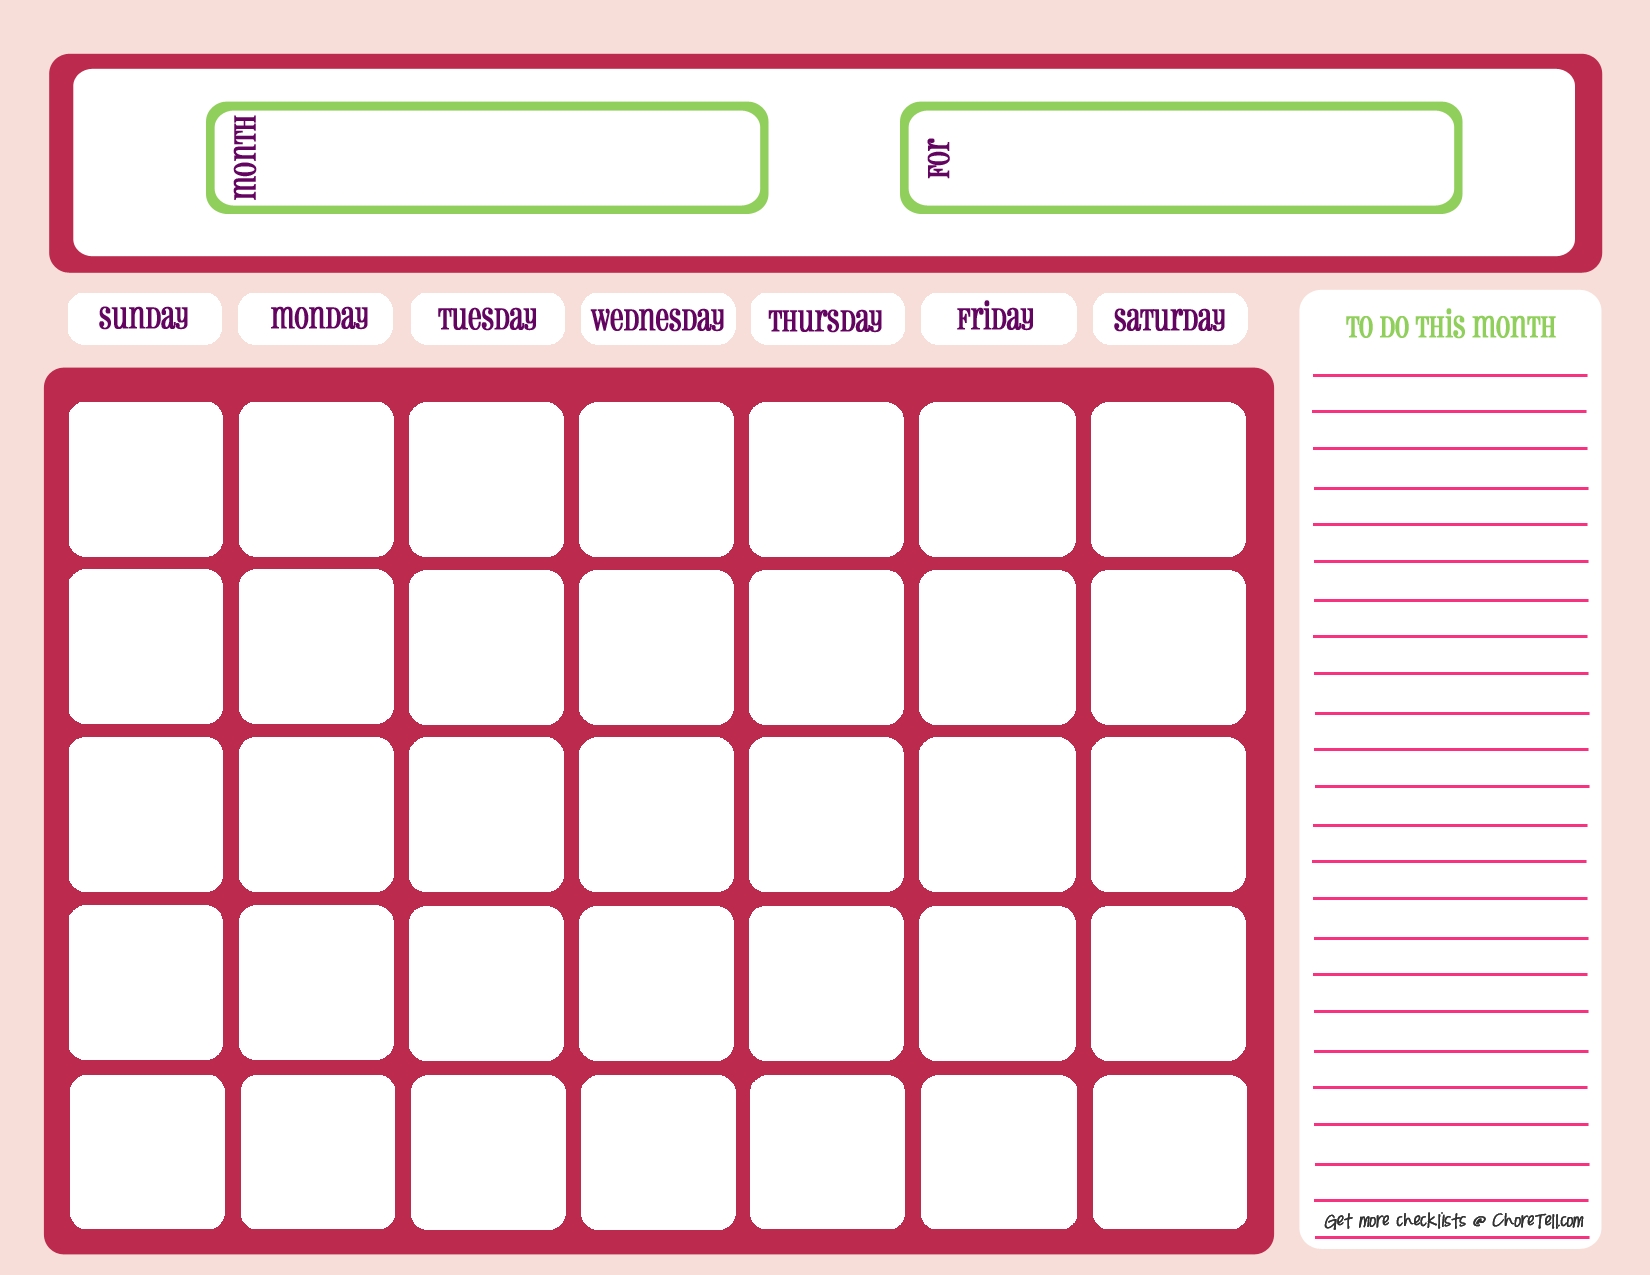 Blank Month Calendar - Pinks - Free Printable Downloads From Choretell inside Printable Calendar By Month You Can Schedule In